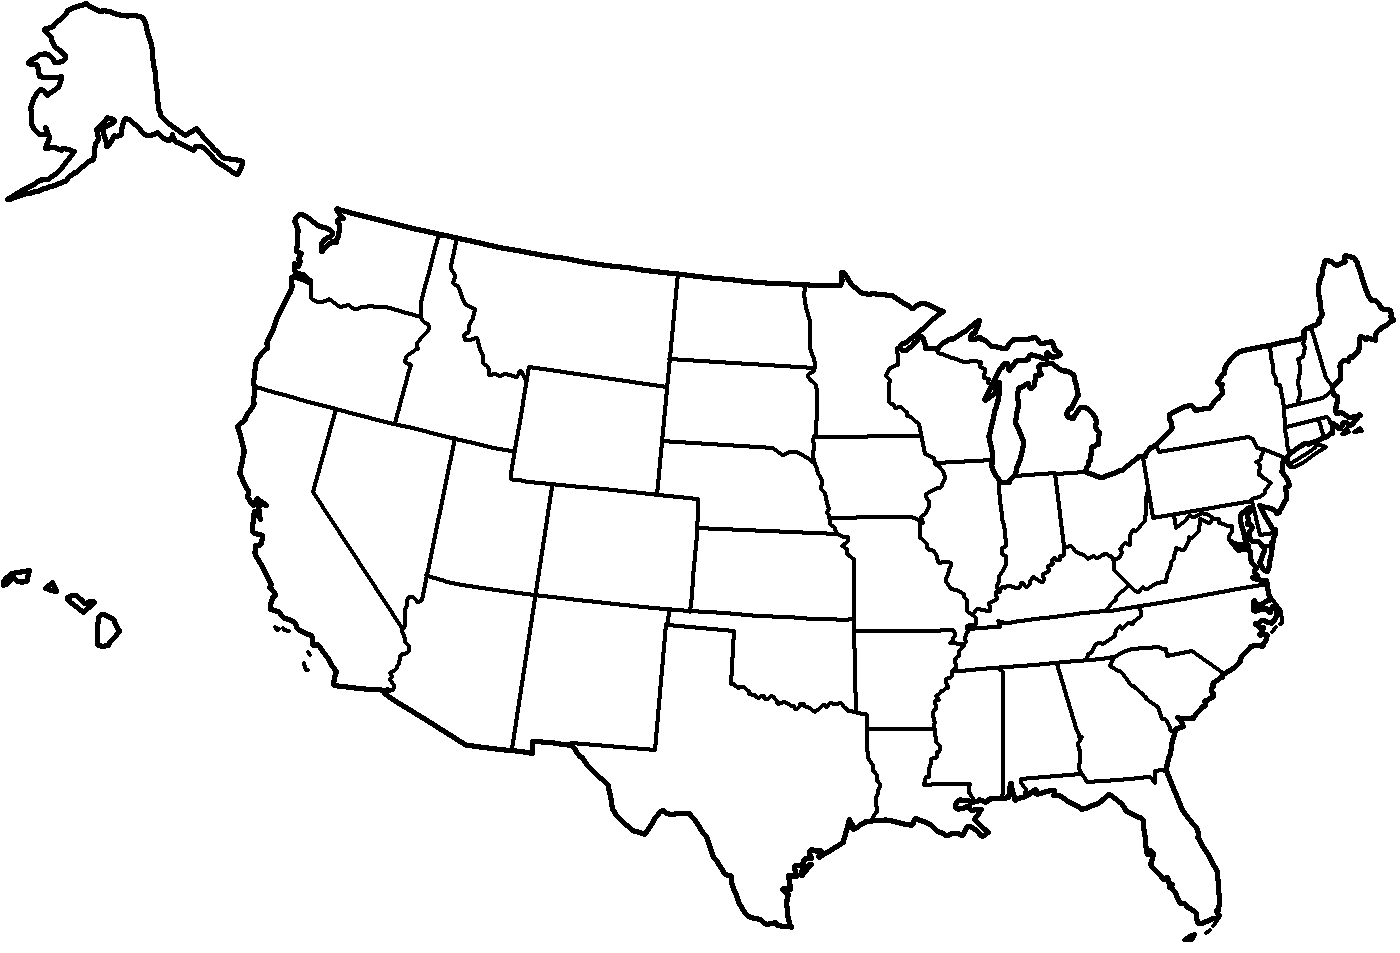 4 Best Images of United States Map Printable Black And White United